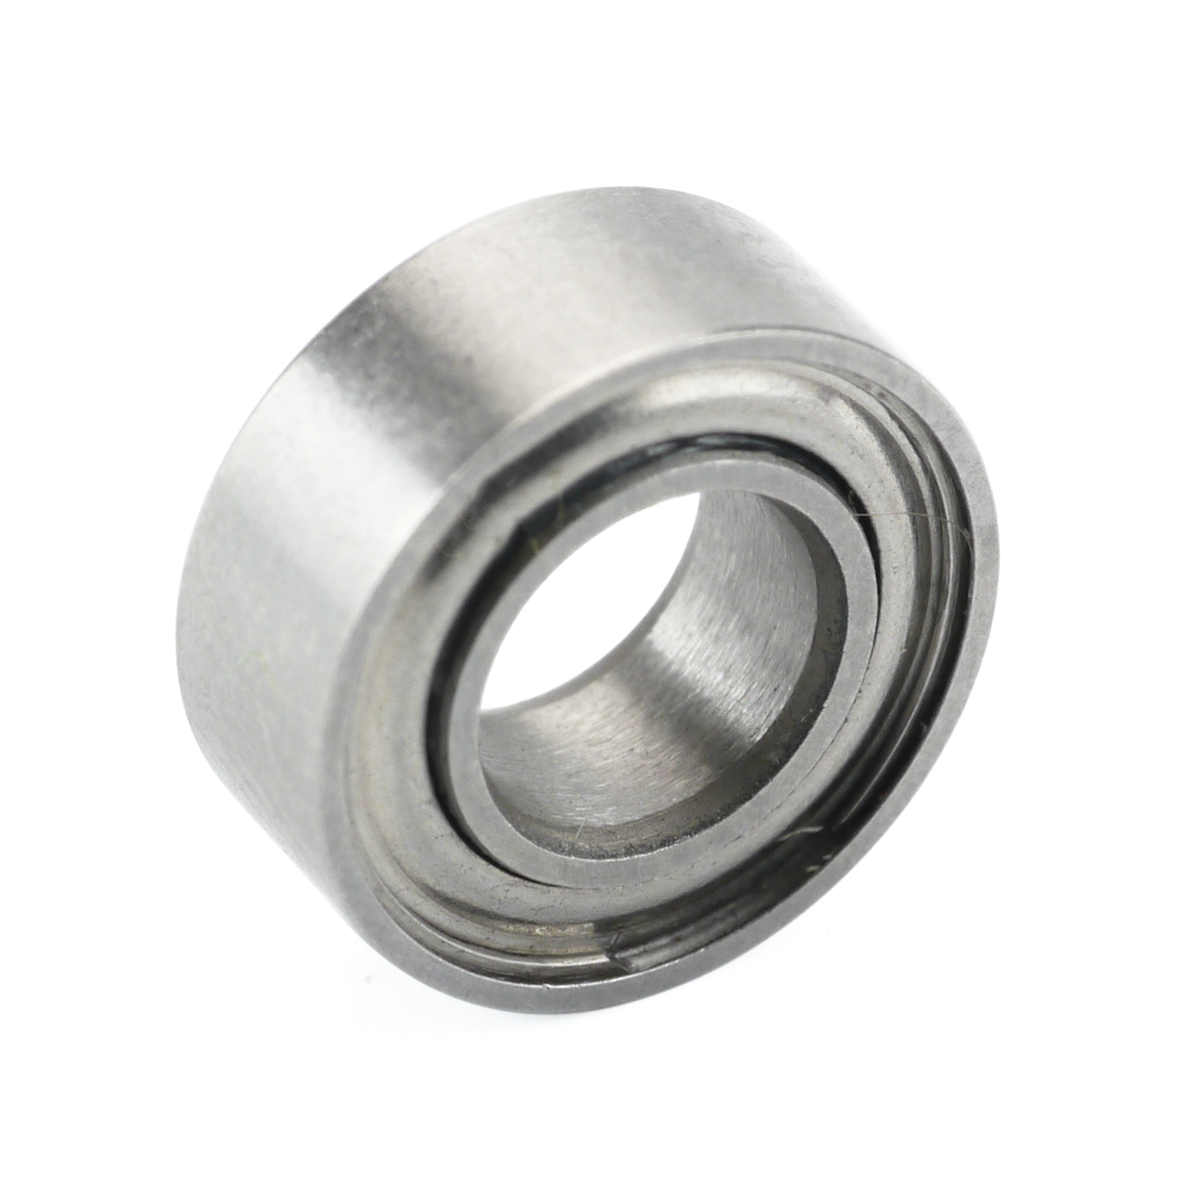 SPINGEAR - Ball Bearing for Spintop Axle